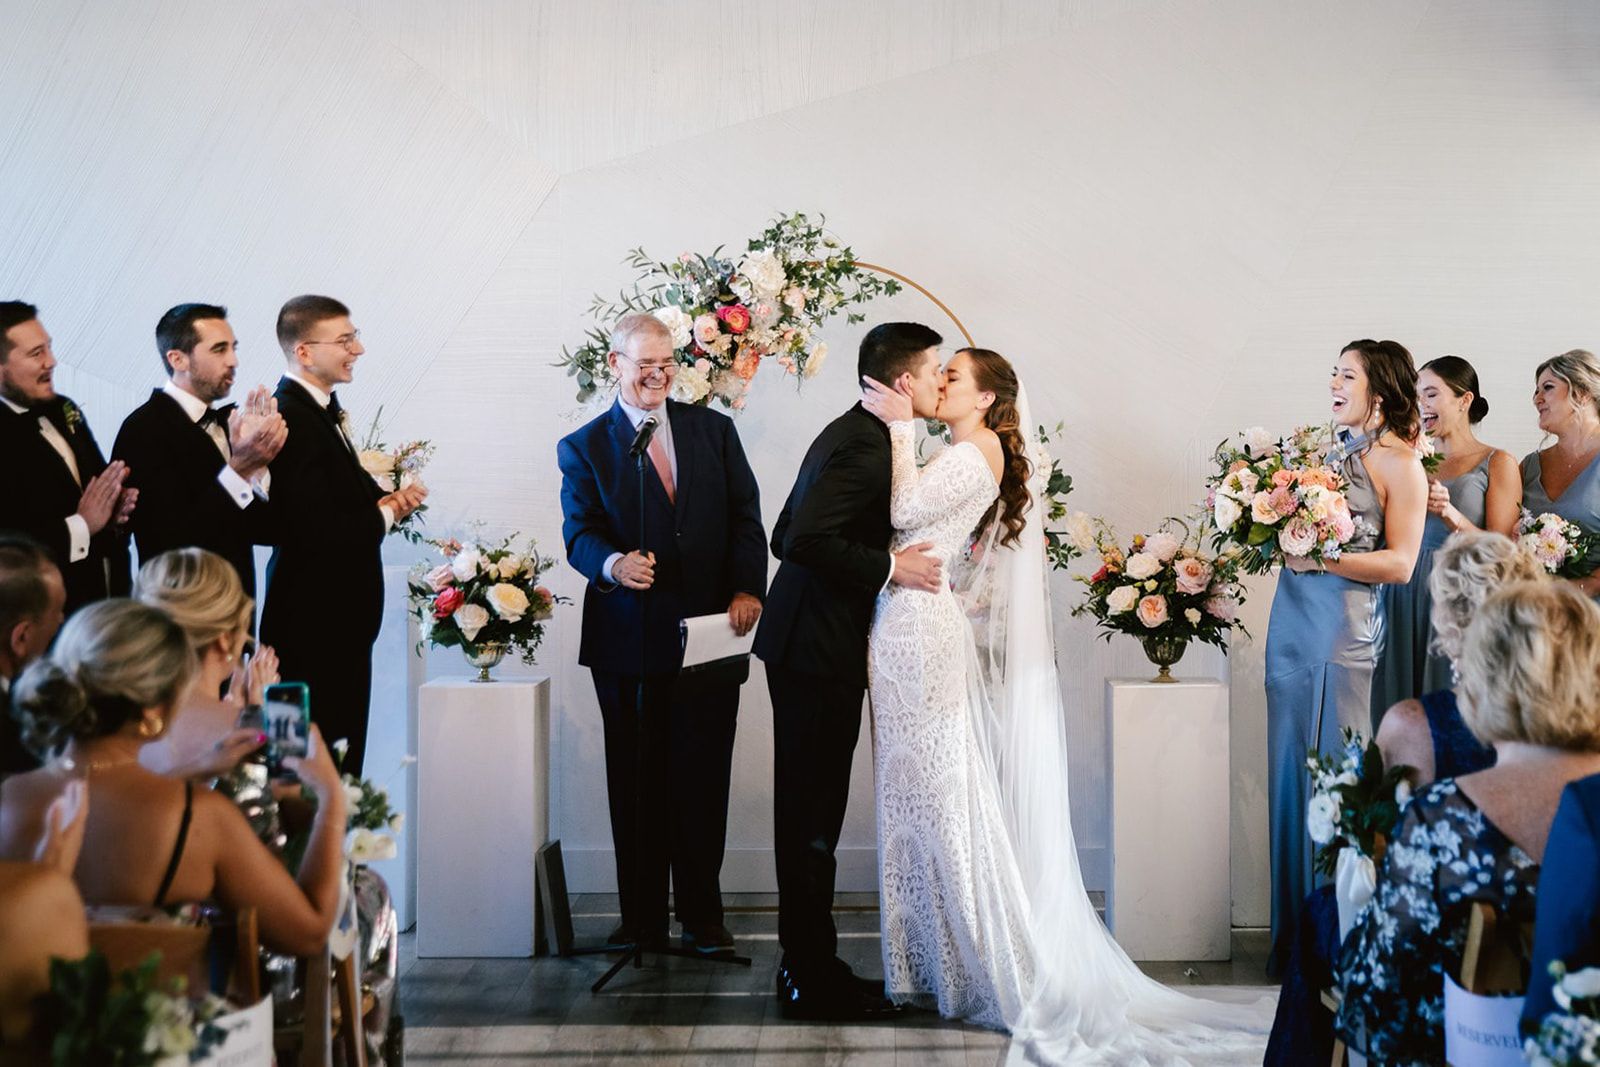 The magical first kiss: The bride and groom seal their love with a tender embrace, captured in a timeless moment at Wald